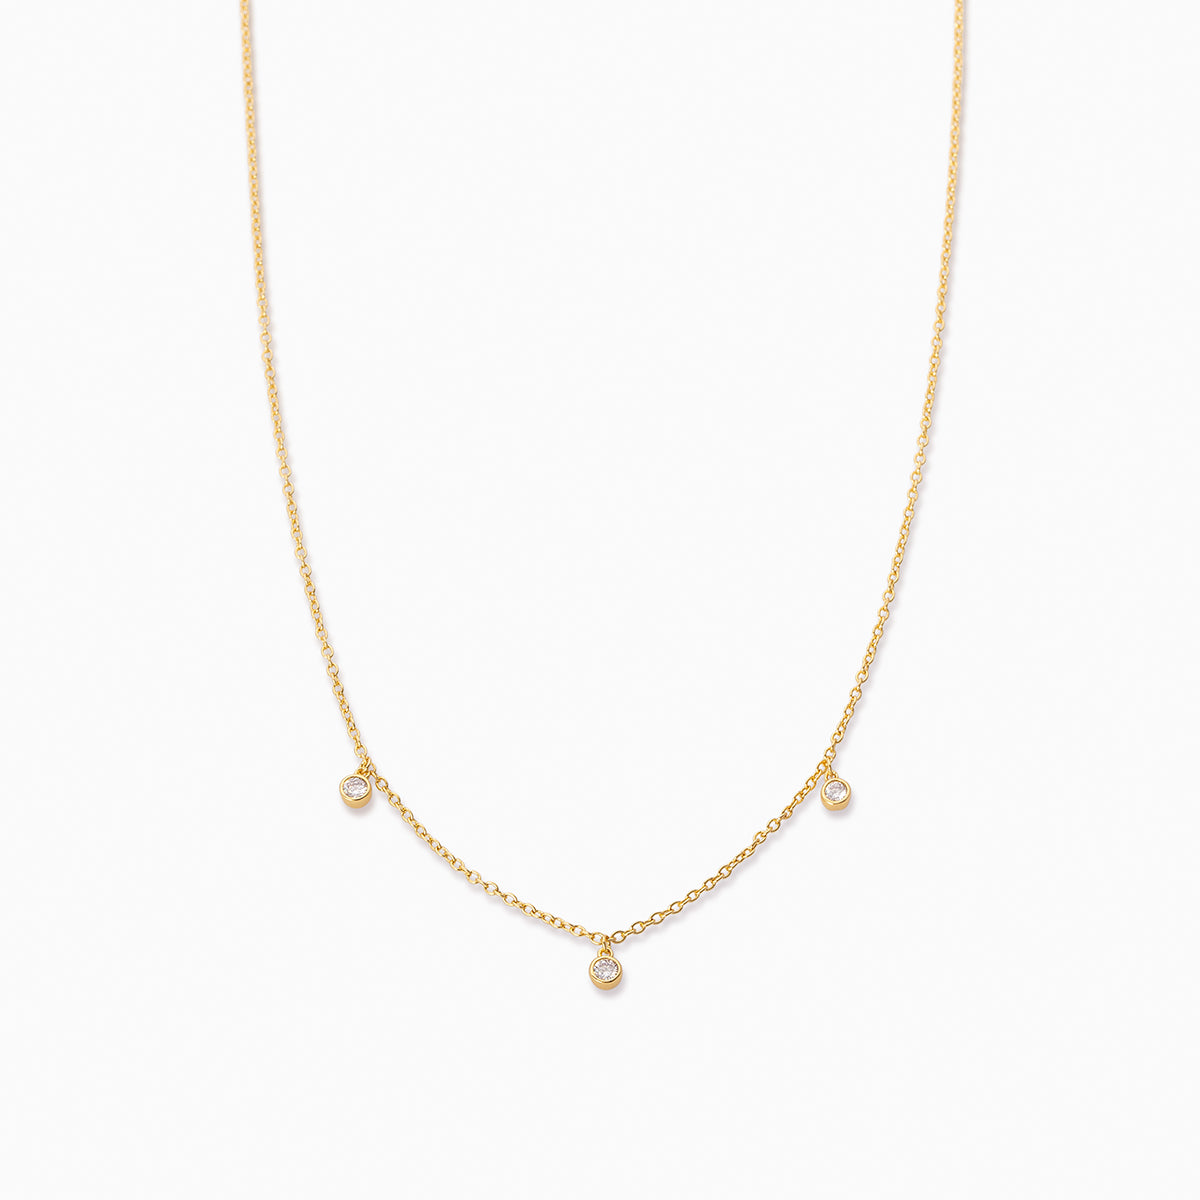 Level Up Necklace | Gold | Product Image | Uncommon James